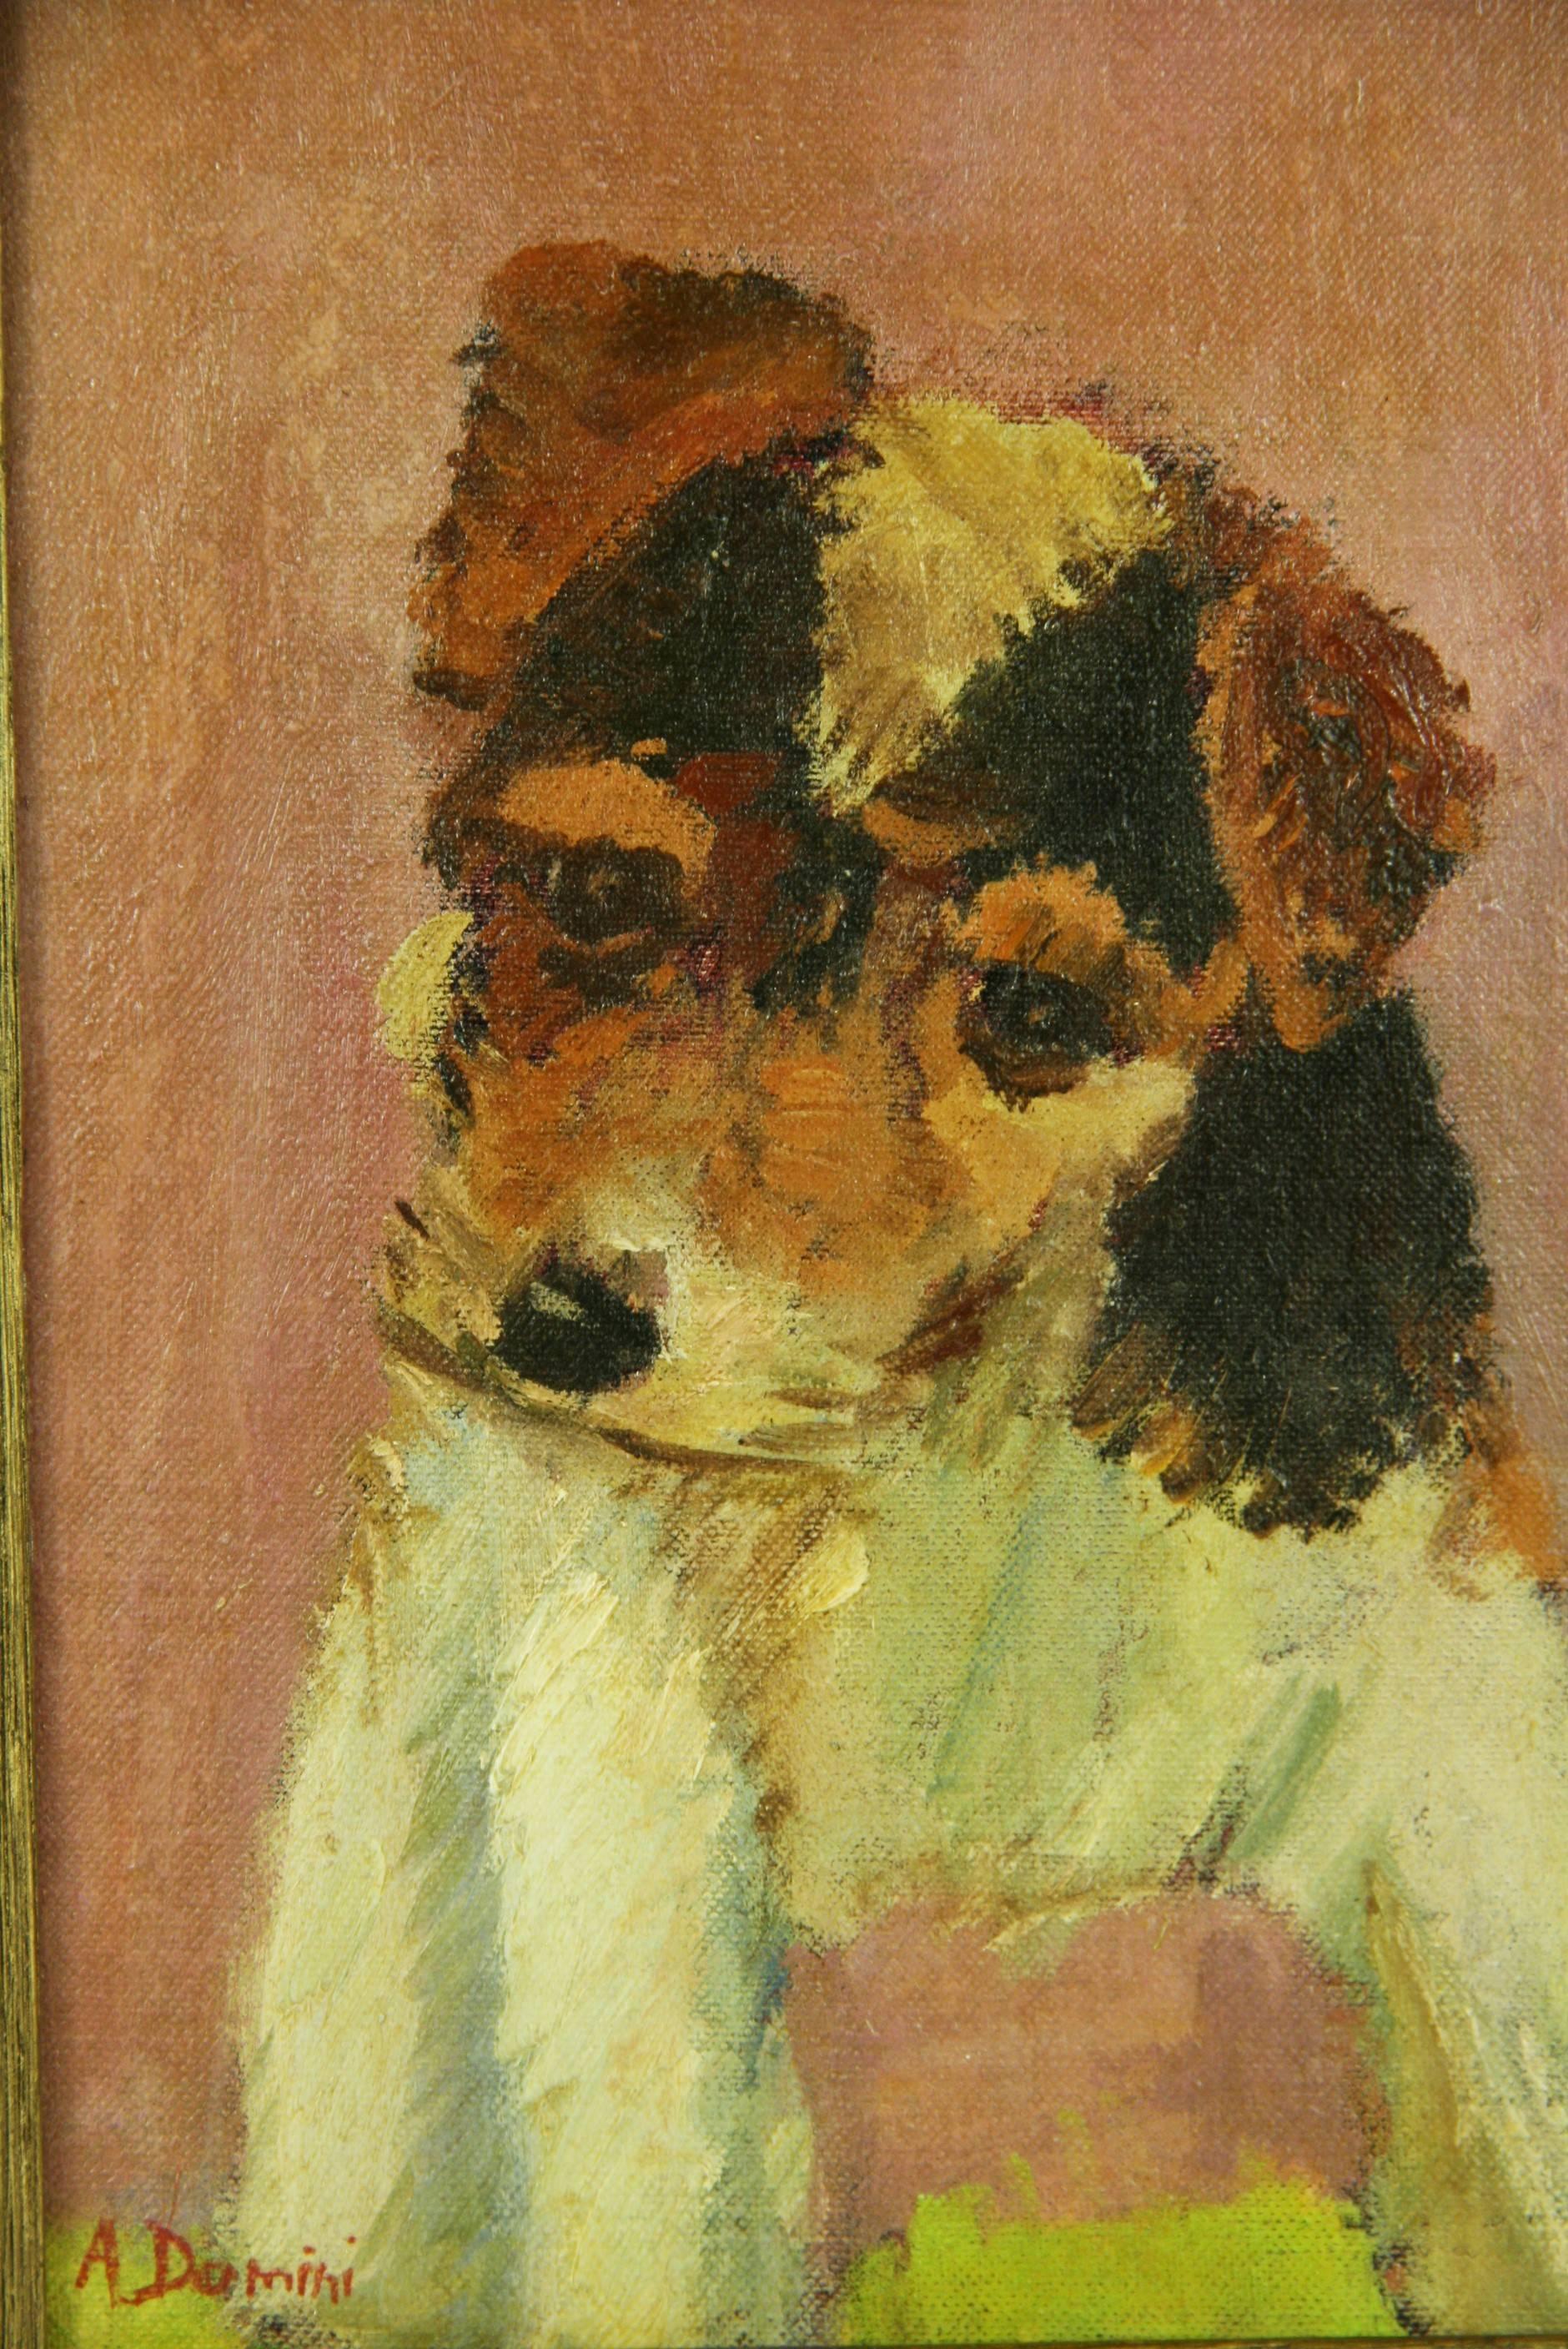 Jack Russel Puppy - Brown Animal Painting by Unknown